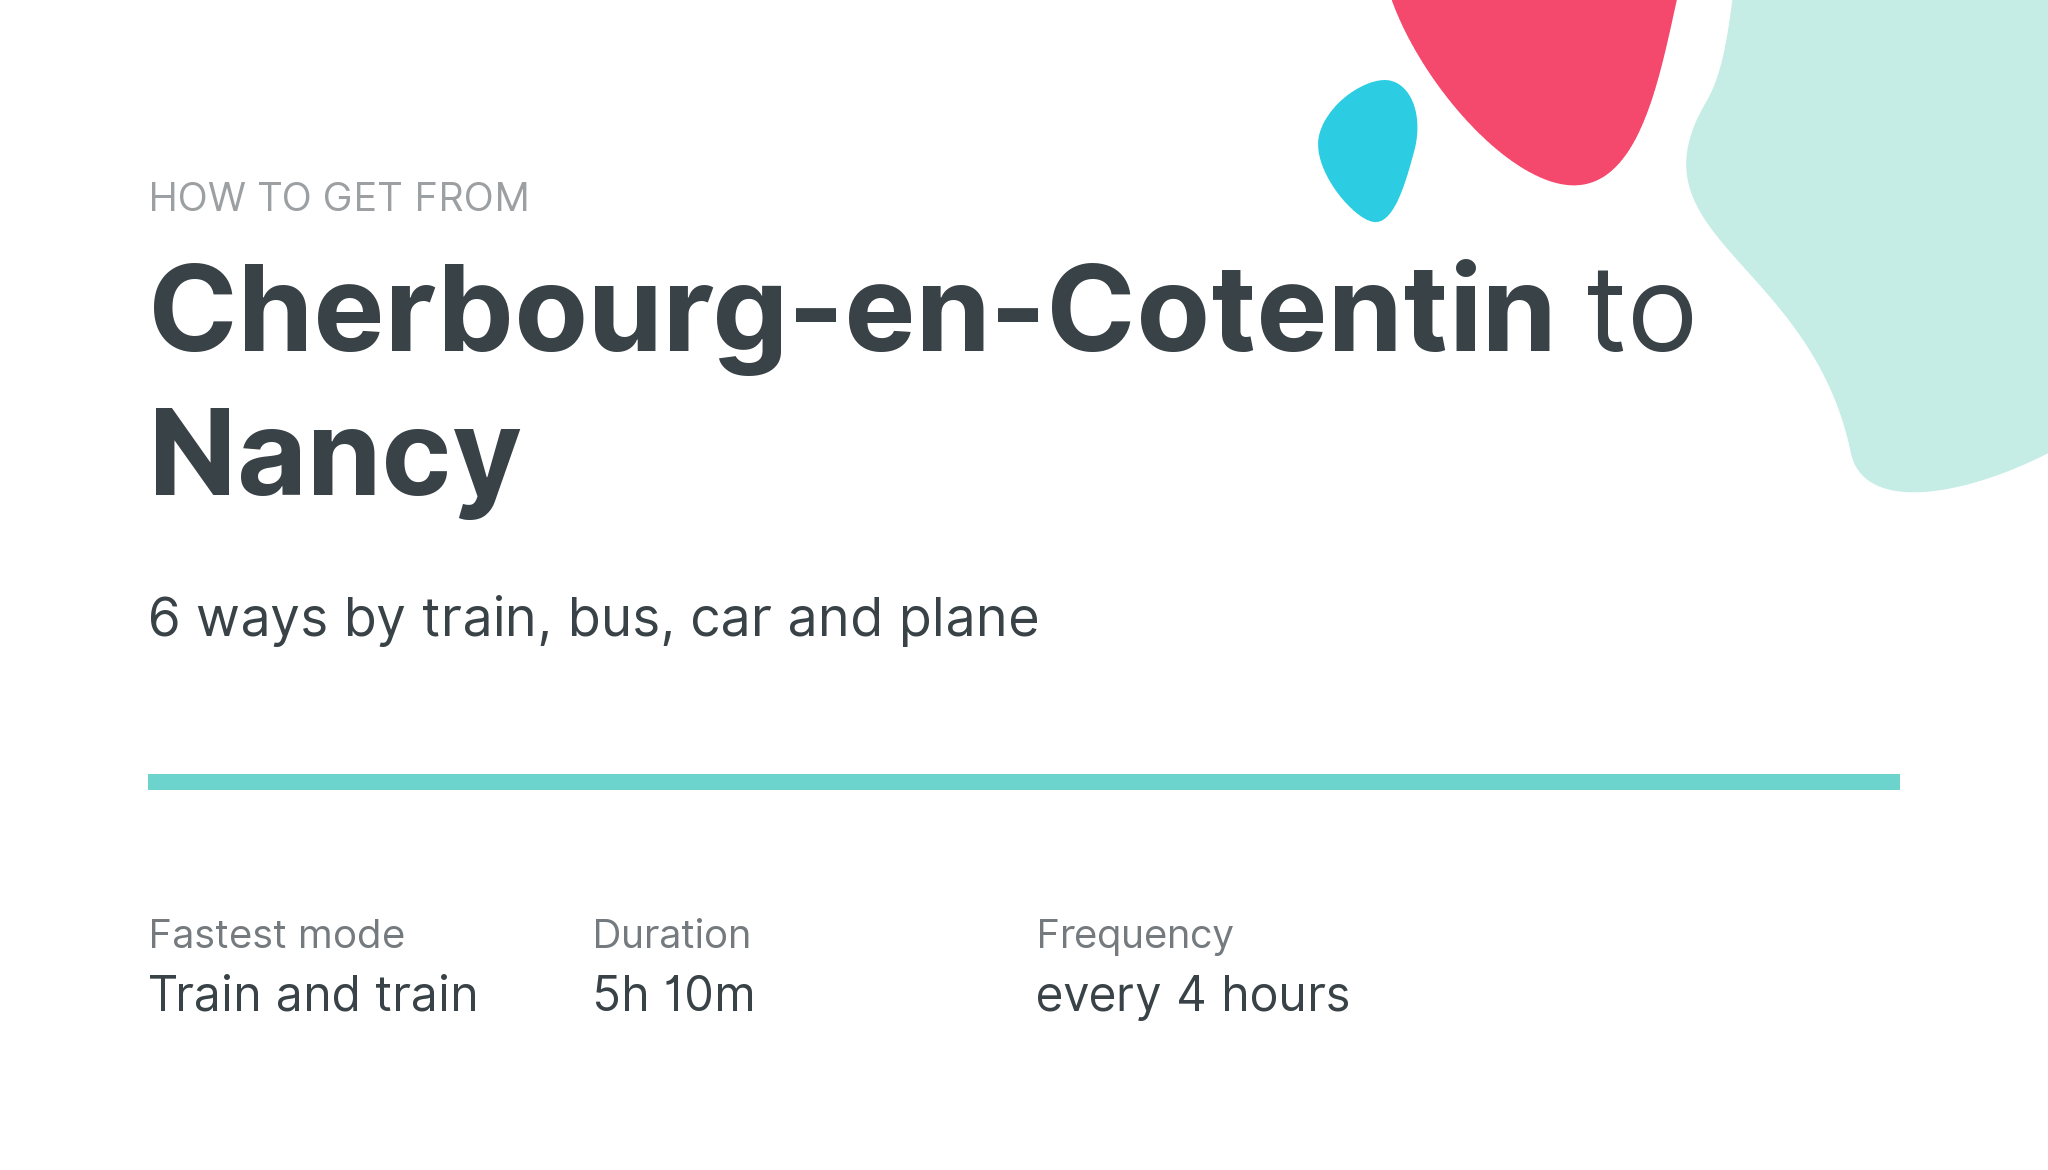 How do I get from Cherbourg-en-Cotentin to Nancy